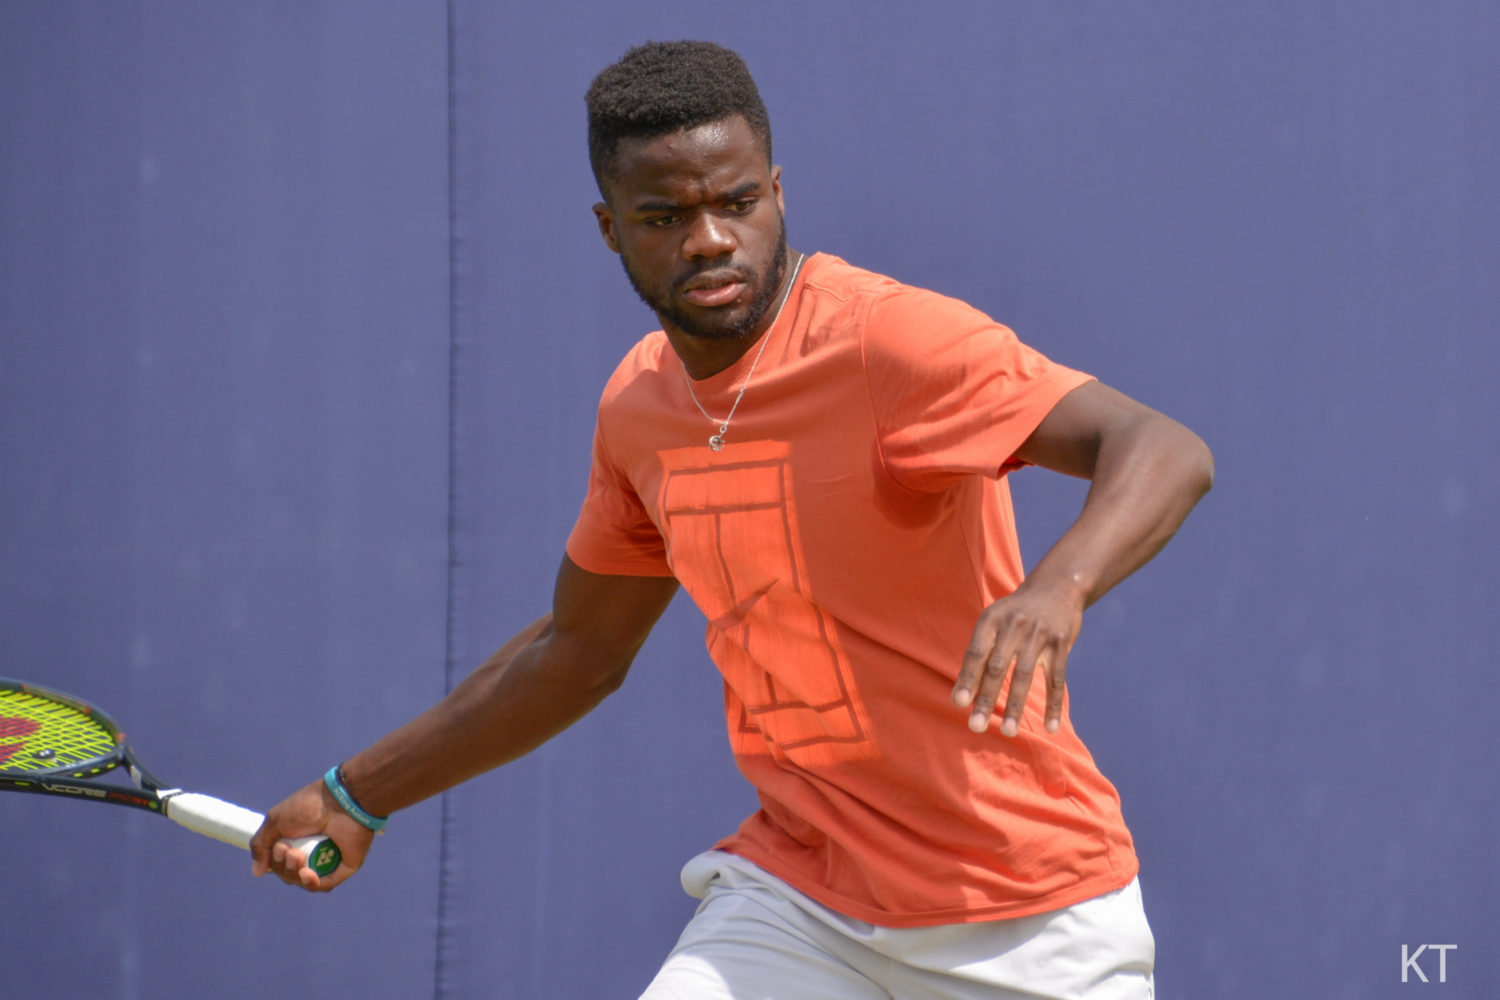 5 Things to Know About Local Tennis Star Frances Tiafoe - Washingtonian